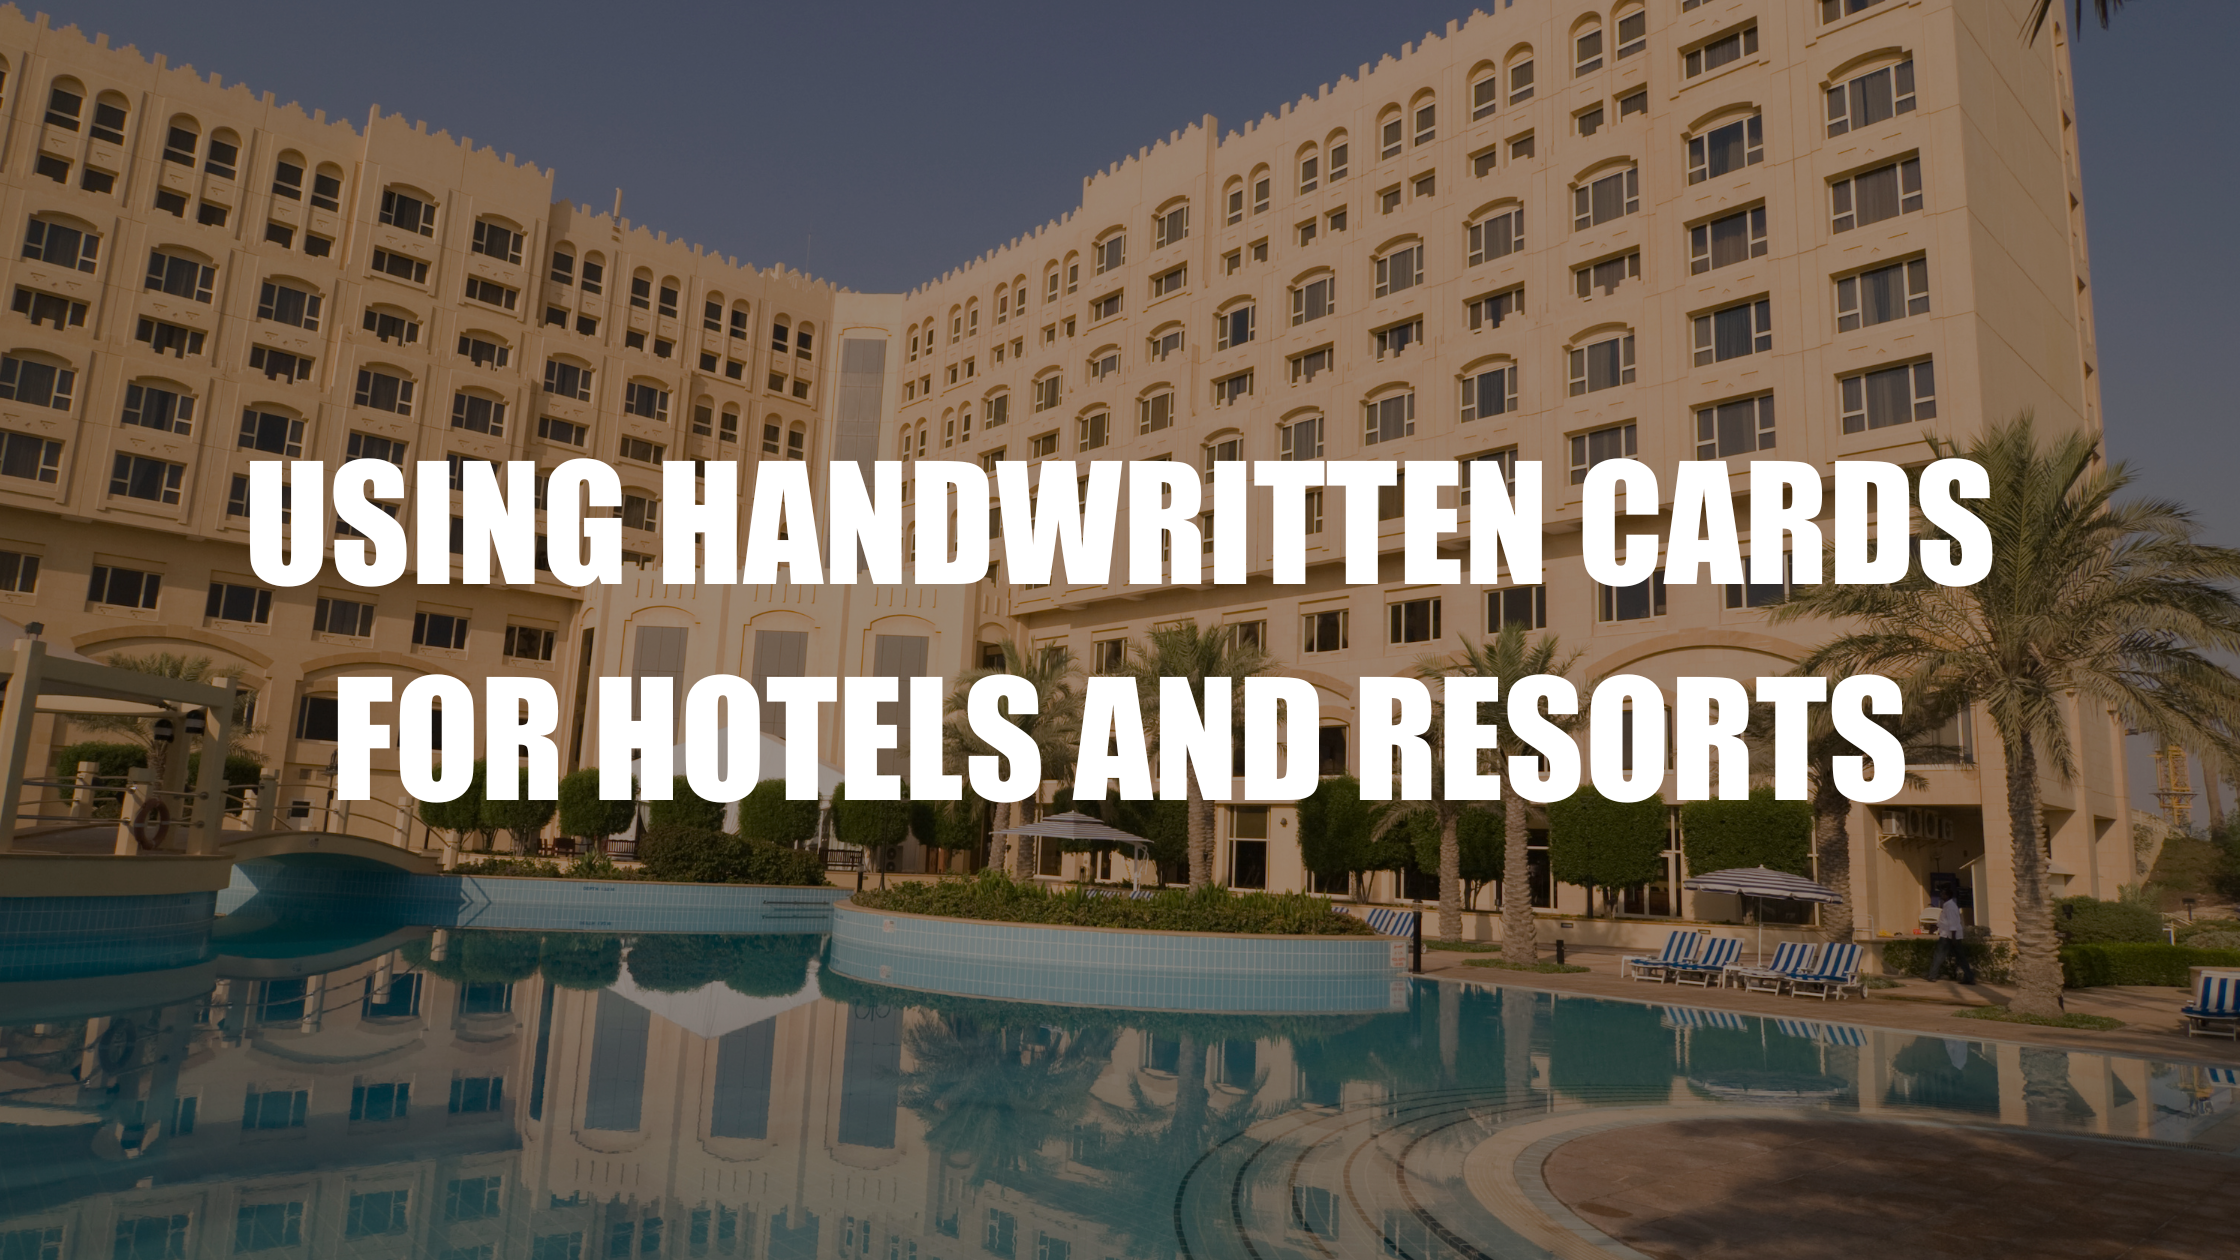 Using Handwritten Cards for Hotels and Resorts